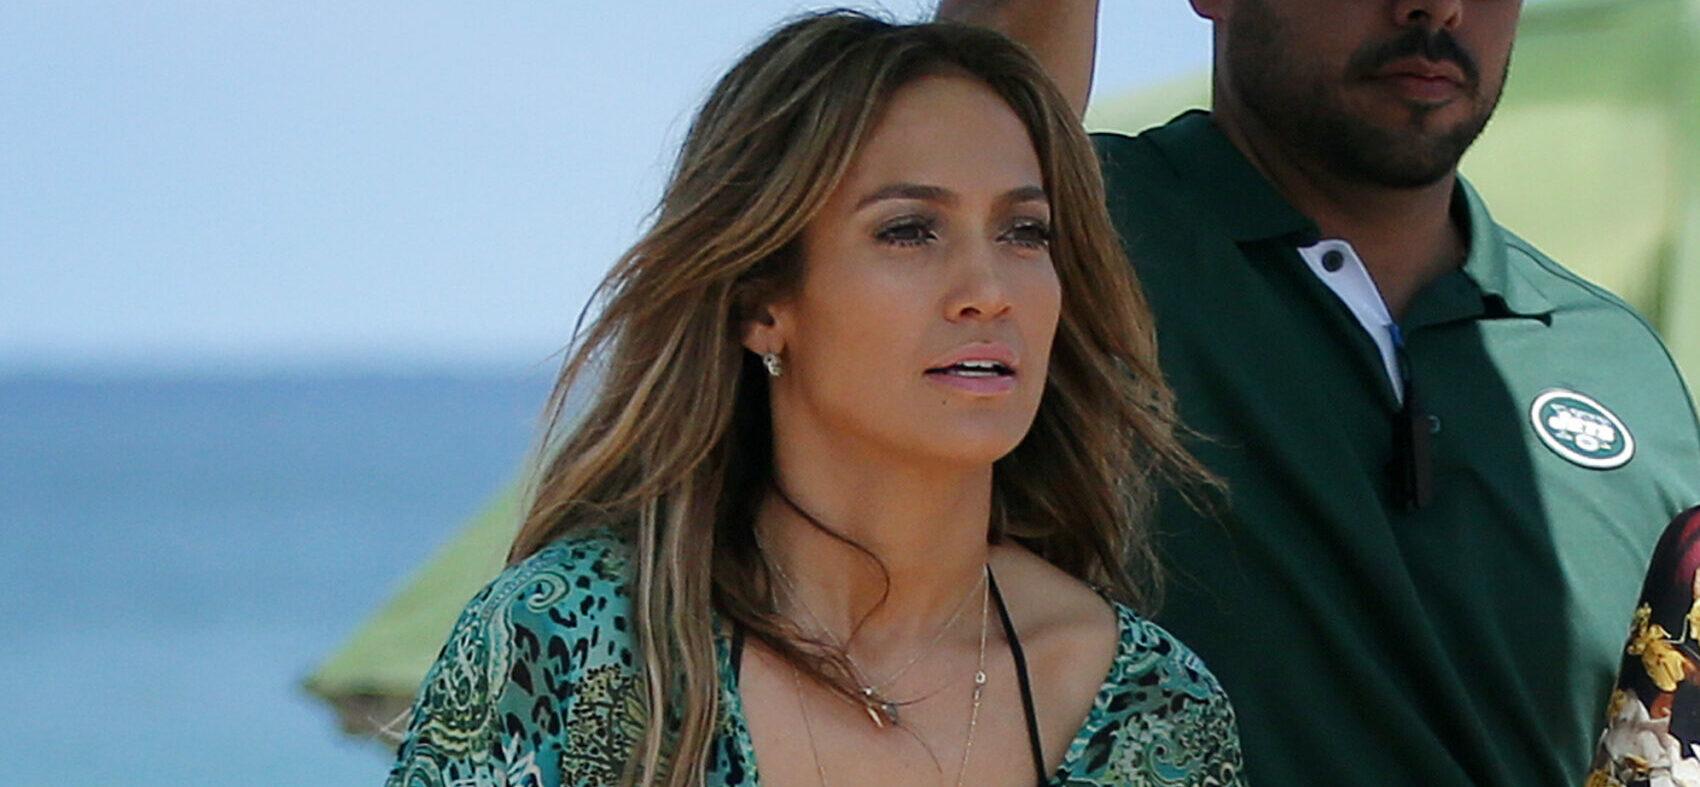 Jennifer Lopez wears a green dress similar to her iconic Versace dress to film a music video for her new song "Live It Up" featuring Pitbull on the beach in Ft. Lauderdale